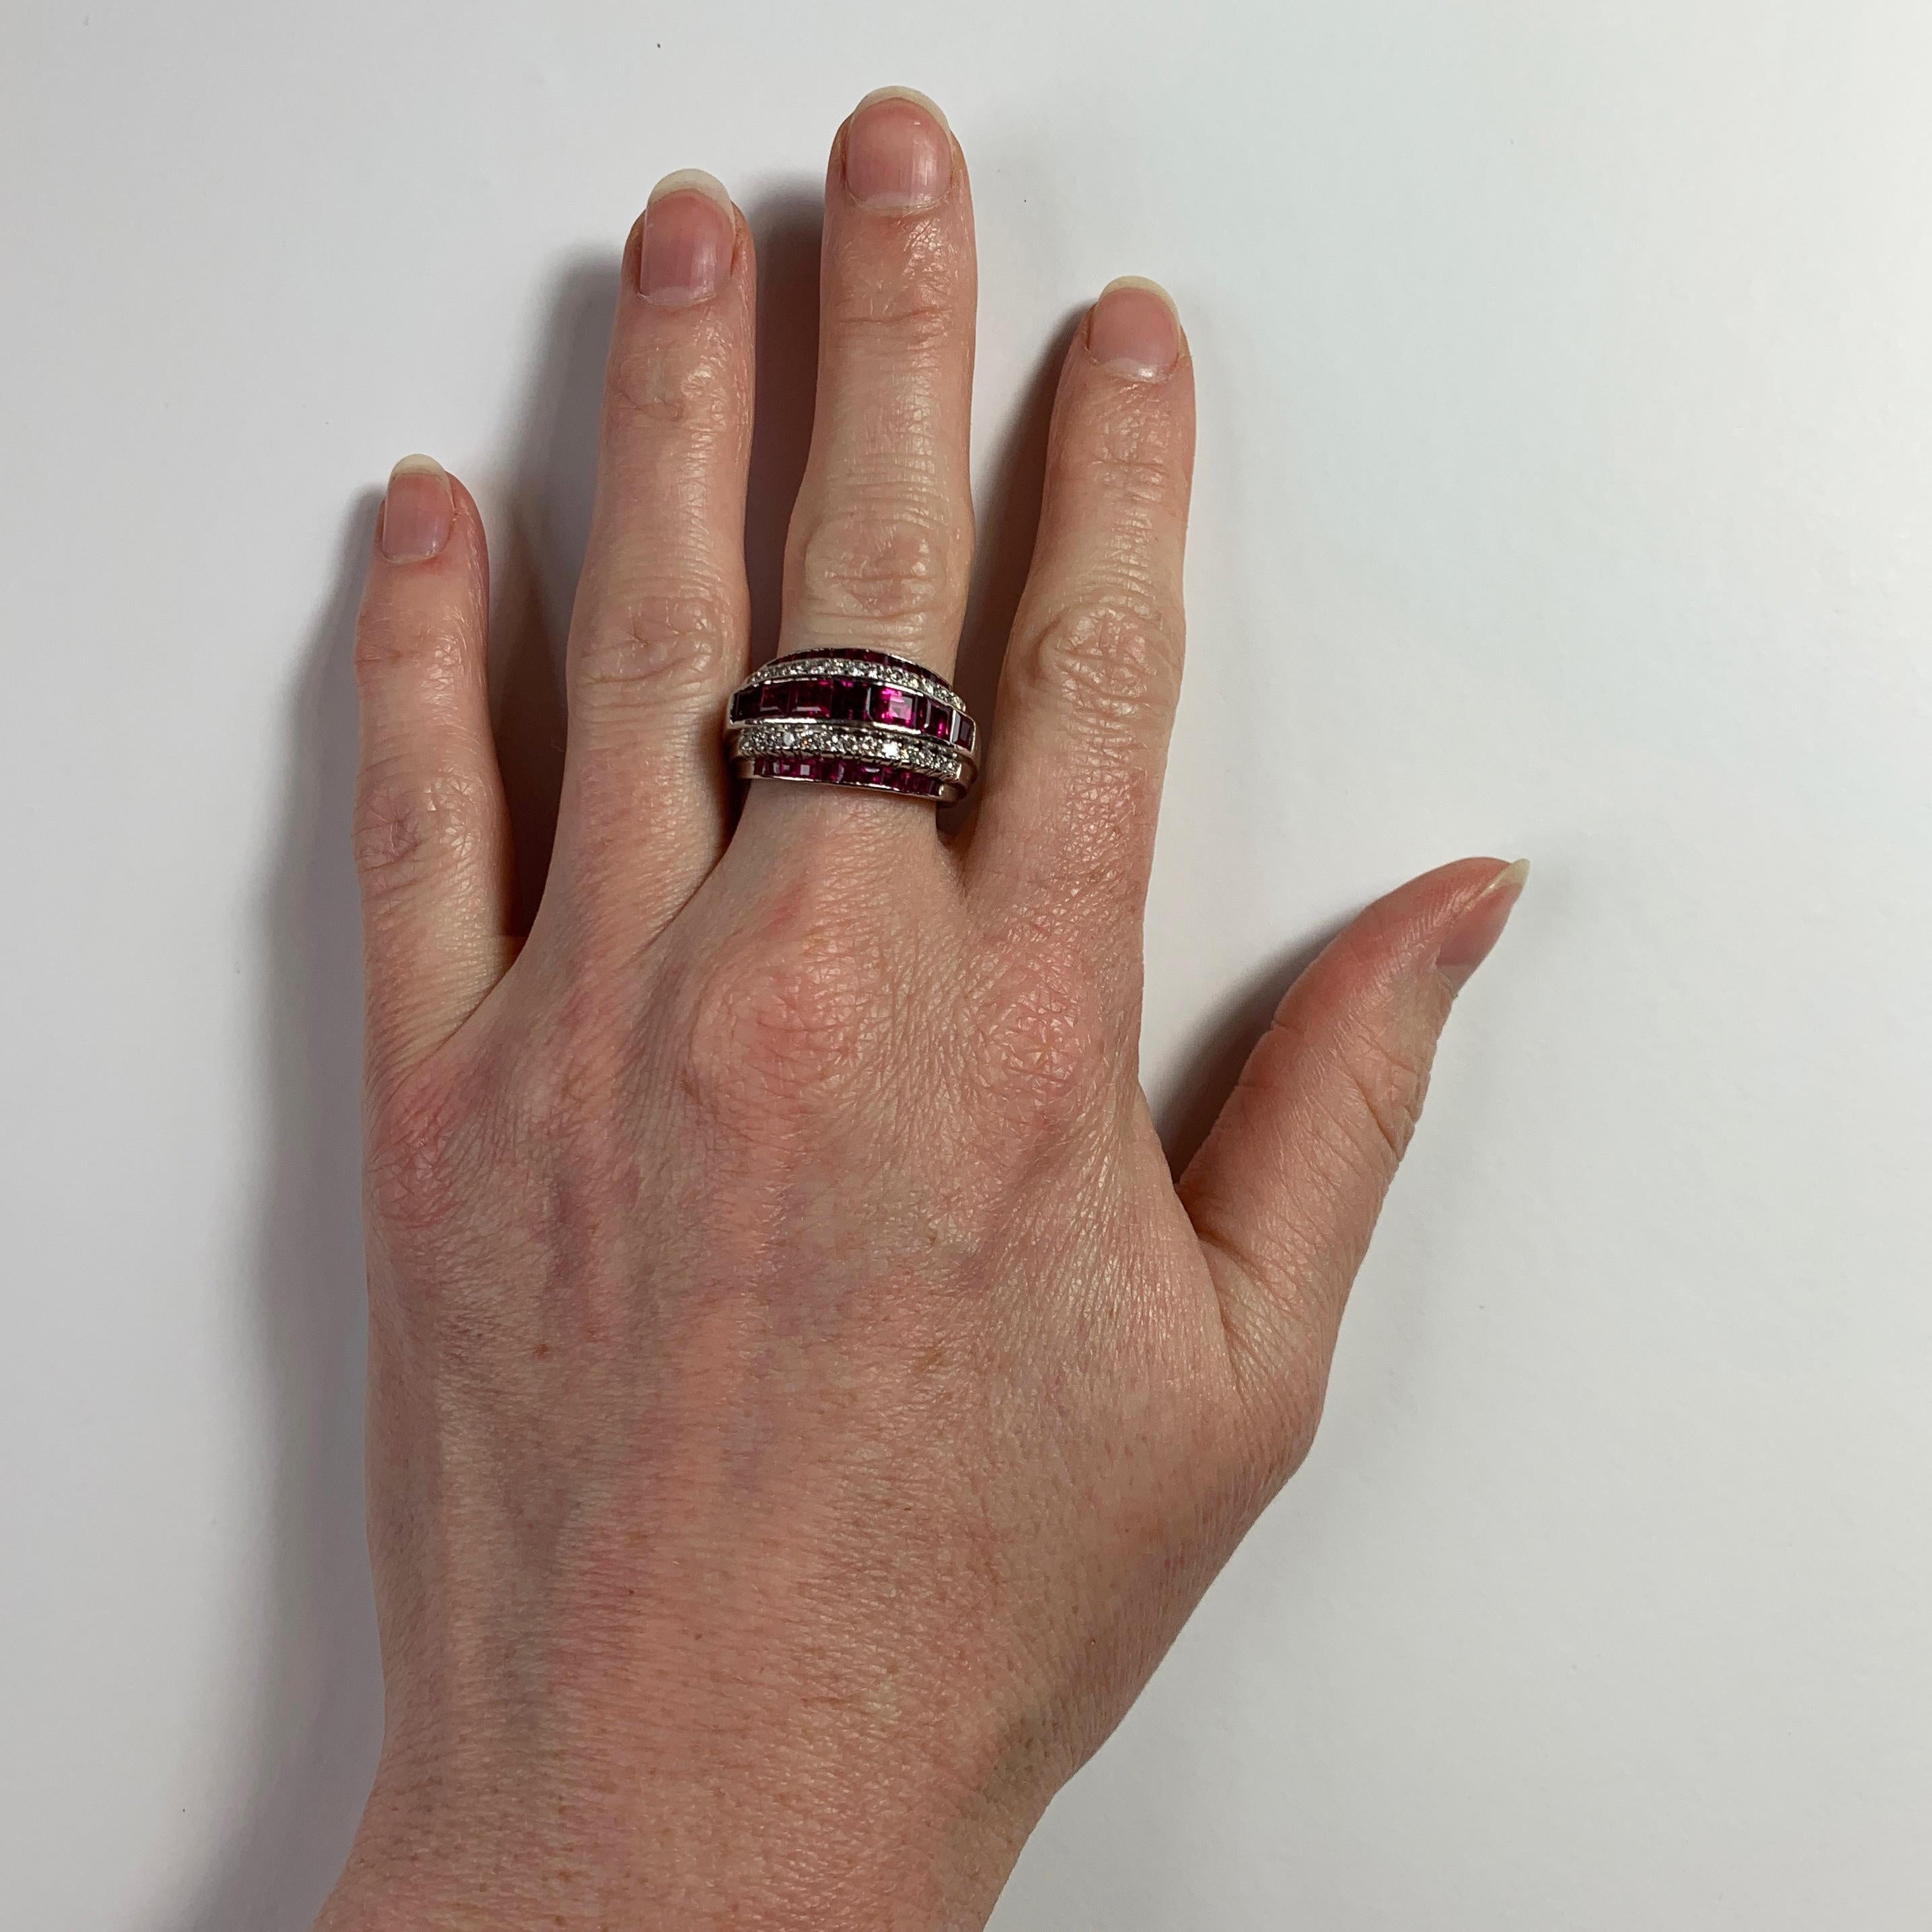 A platinum, ruby and diamond ring by Oscar Heyman Brothers (OHB) set with 29 step cut red rubies and 26 round brilliant cut white diamonds. The rubies show no indications of heat treatment and have inclusions which indicate Burmese origin. Numbered